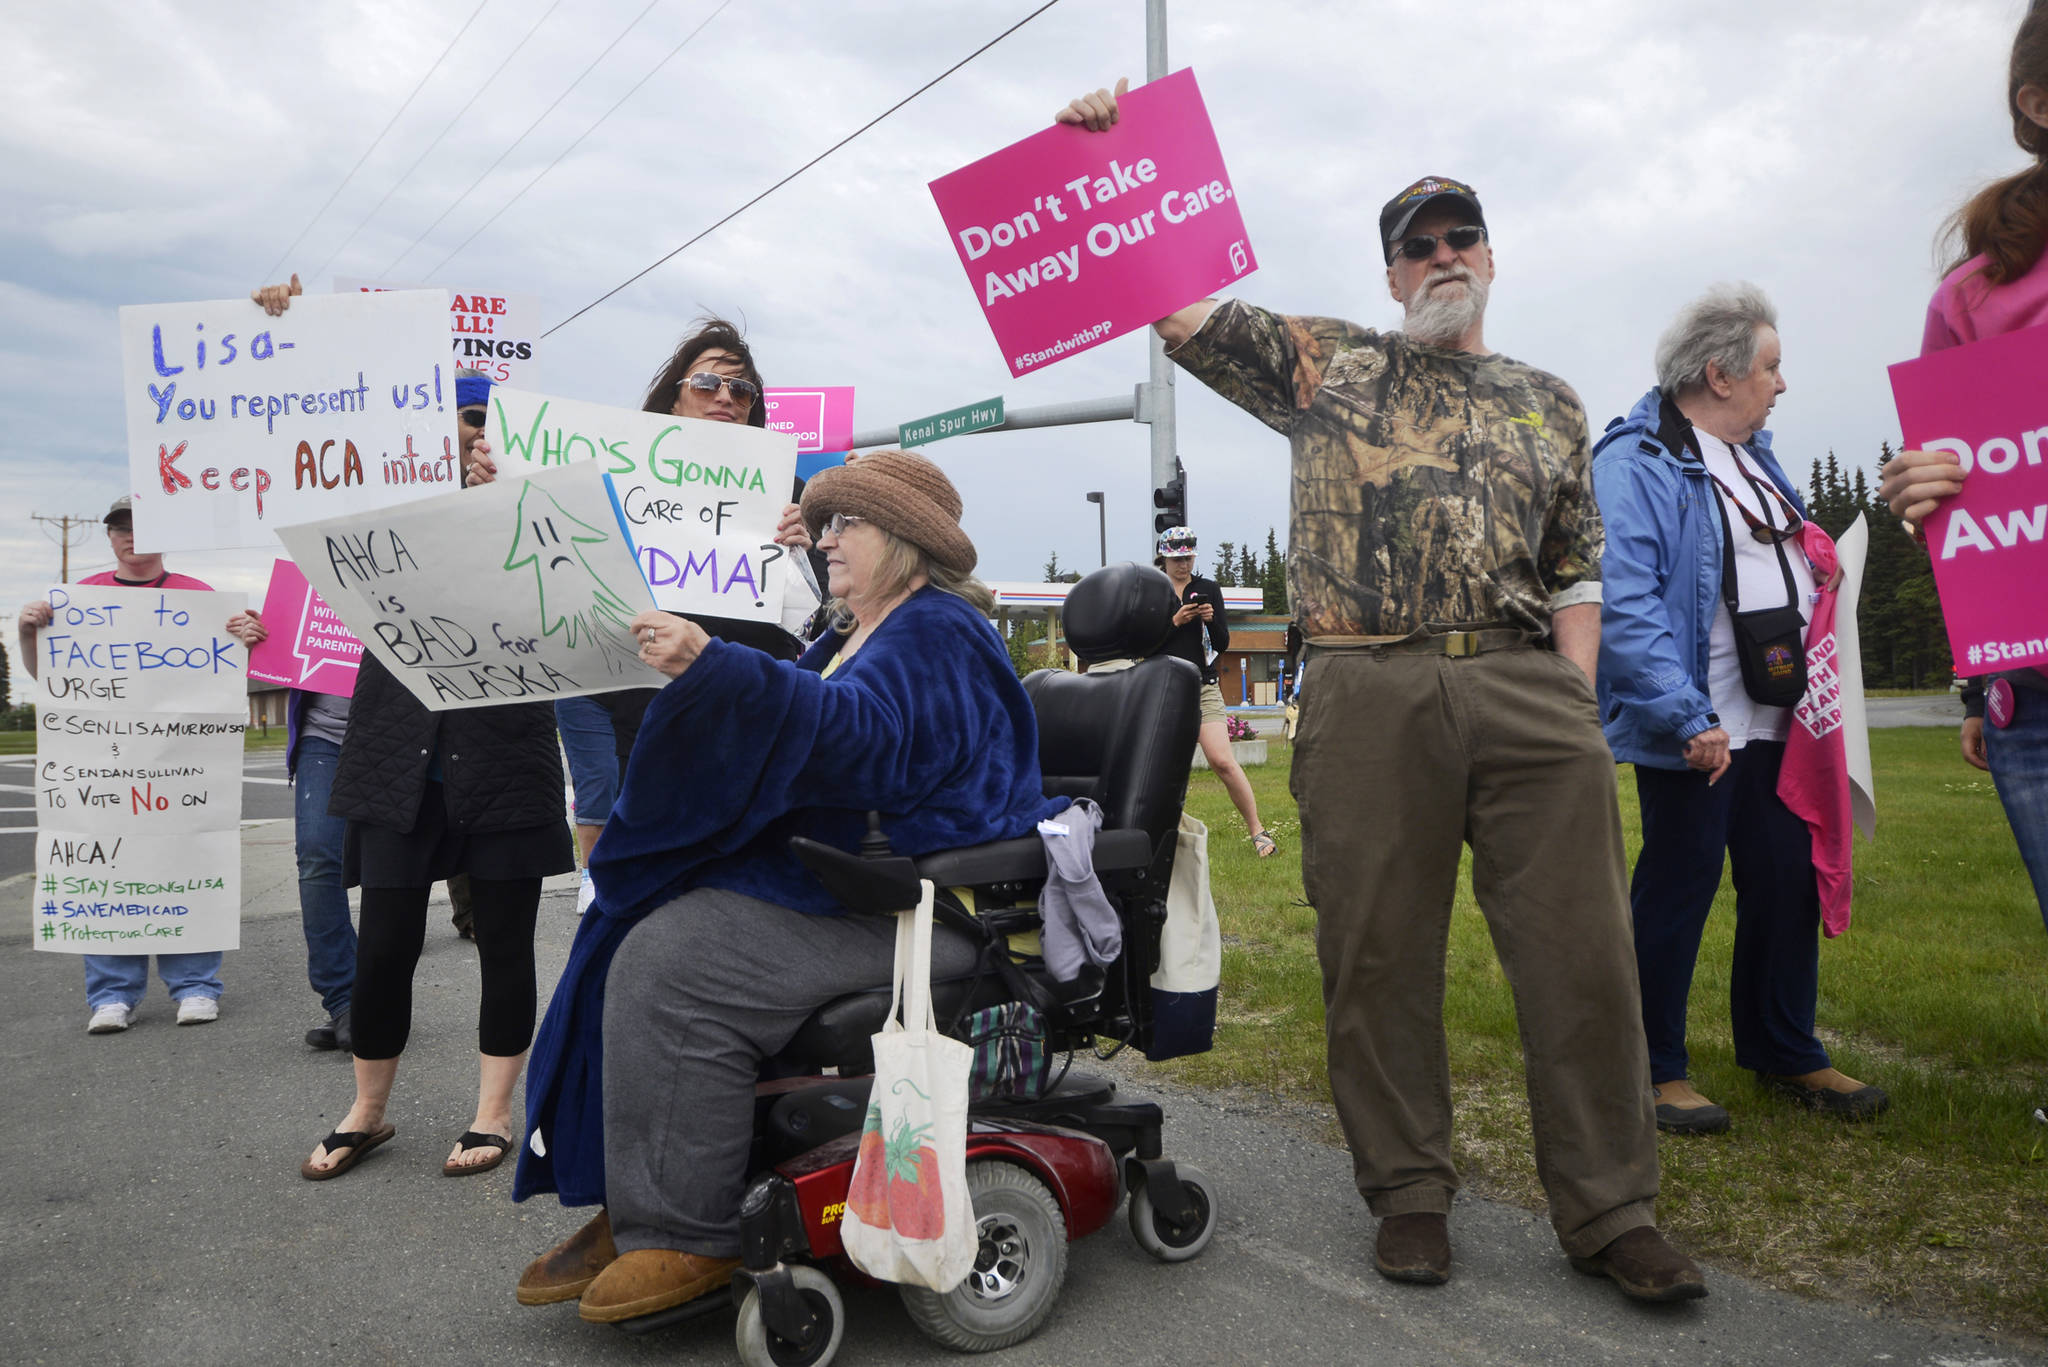 Linda Nelson (in wheelchair) and her husband Rodney Nelson hold signs in a demonstration by supporters of women’s health organization Planned Parenthood and opponents of the U.S Senate healthcare bill known as the Better Care Reconciliation Act on Thursday, July 6, 2017 in Kenai, Alaska. (Ben Boettger/Peninsula Clarion)